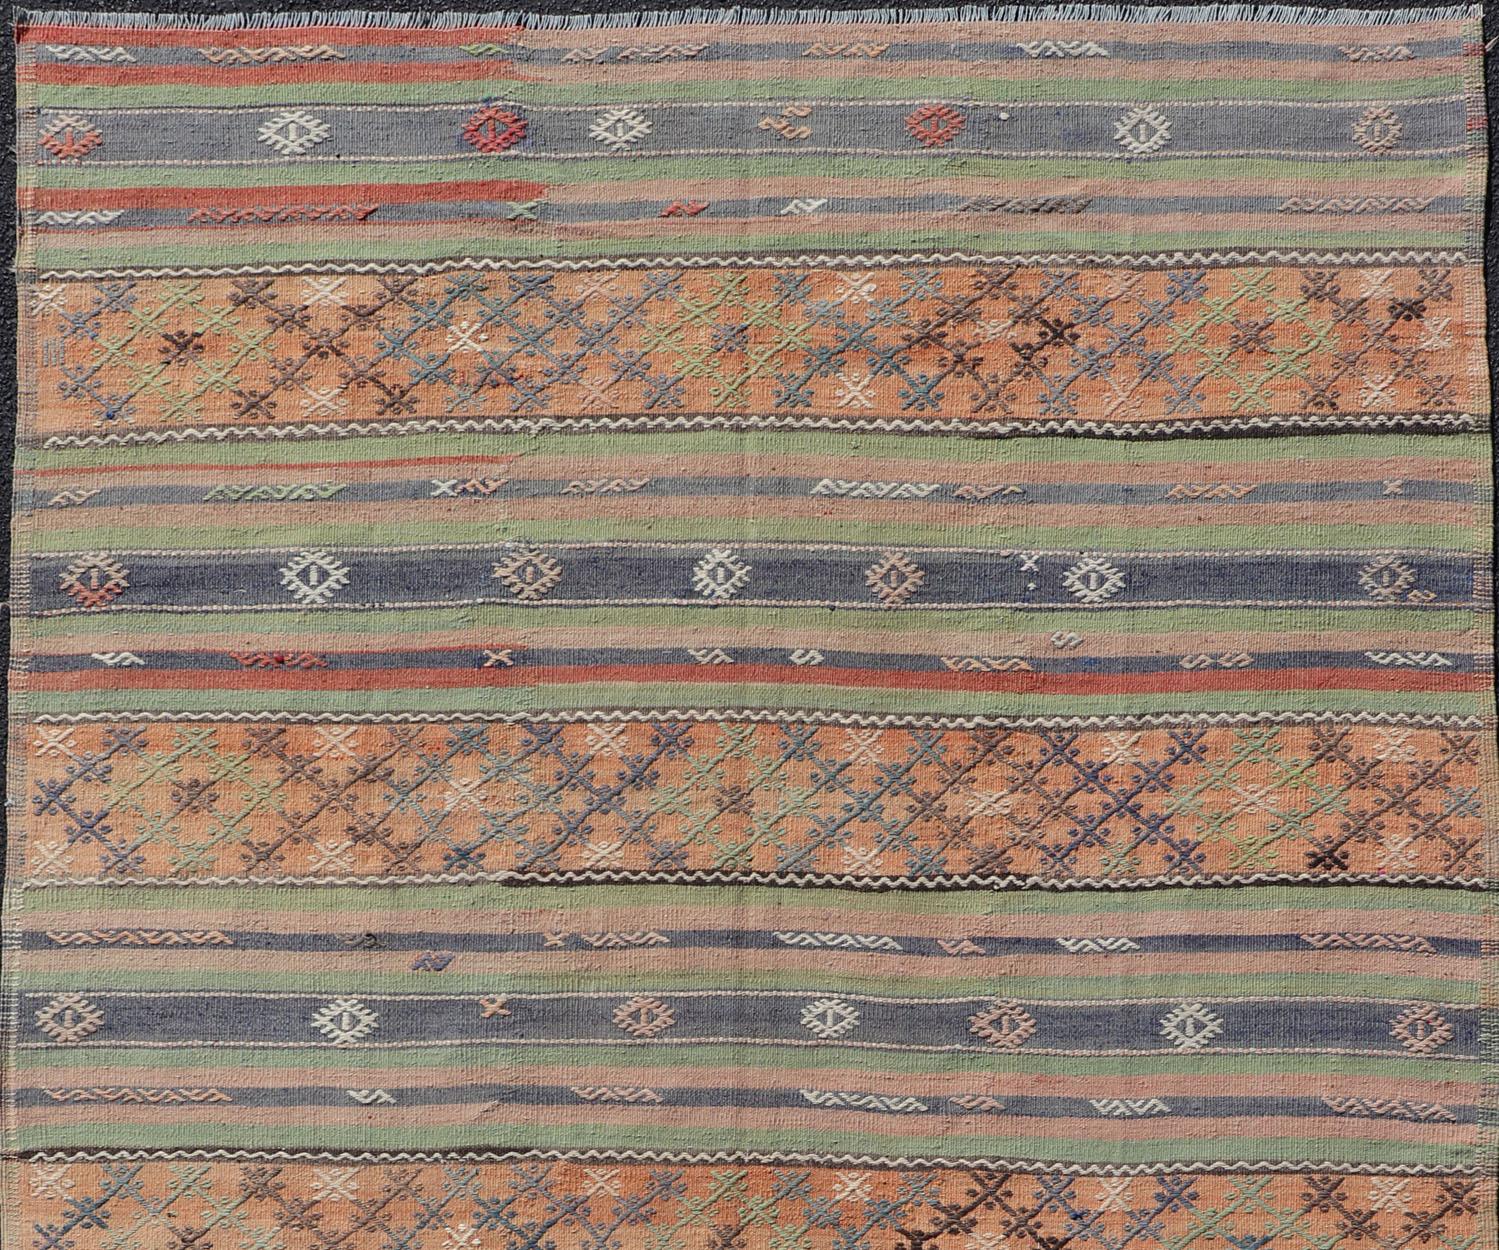 Colorful Turkish Kilim rug with stripes and geometric elements, rug TU-NED-1034, country of origin / type: Turkey / Kilim, circa mid-20th century

Featuring geometric shapes rendered in a repeating horizontal stripe design, this unique Mid-Century